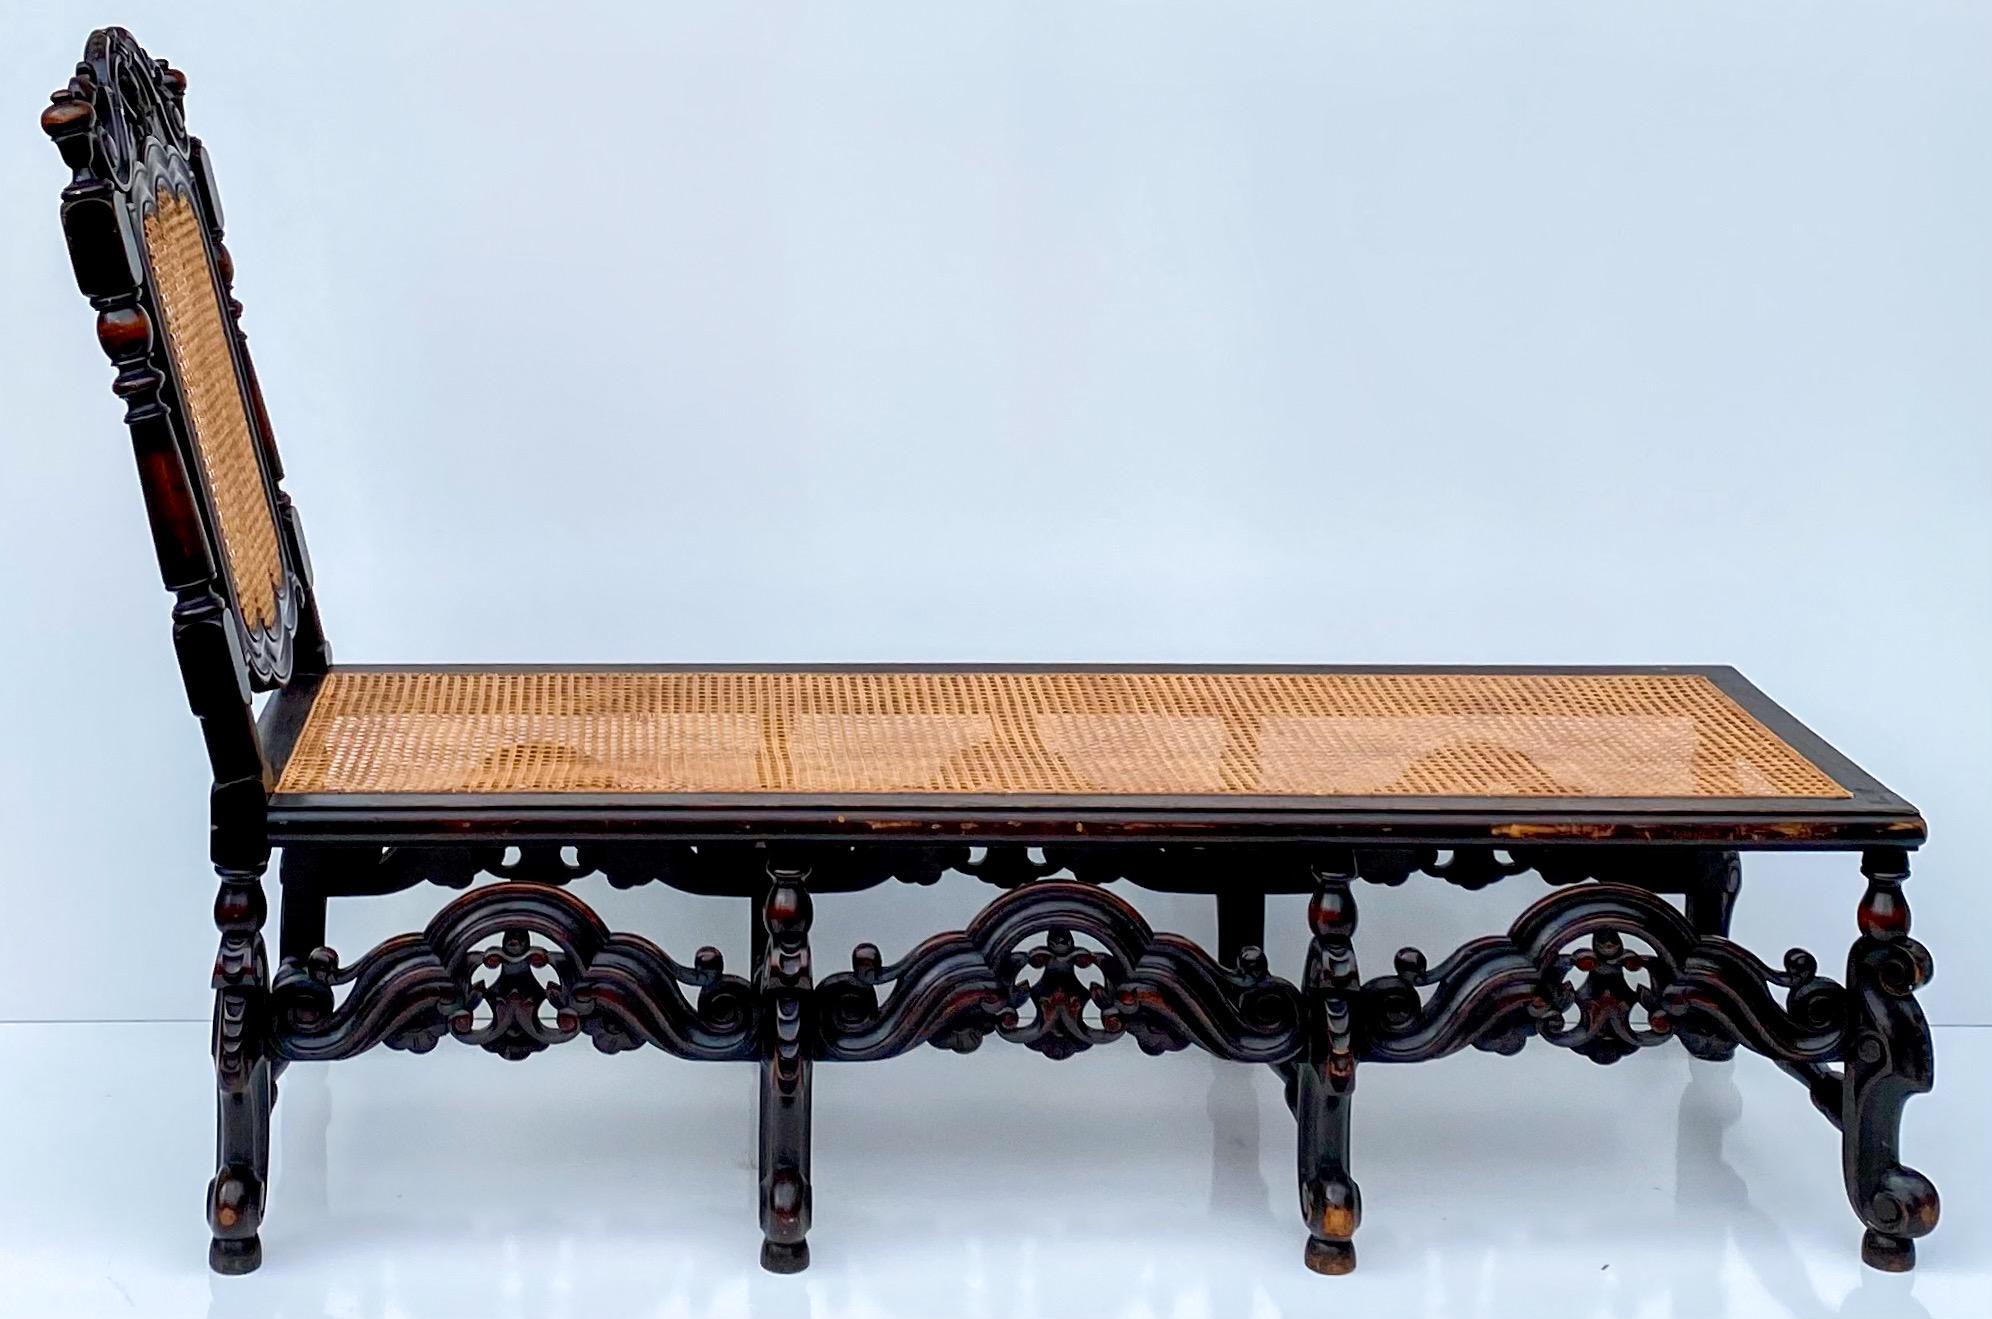 This is a late 19th century carved oak and cane William and Mary style chaise. The carved arched stretchers are intact and solid as is the cane. It is unmarked and in very good condition.